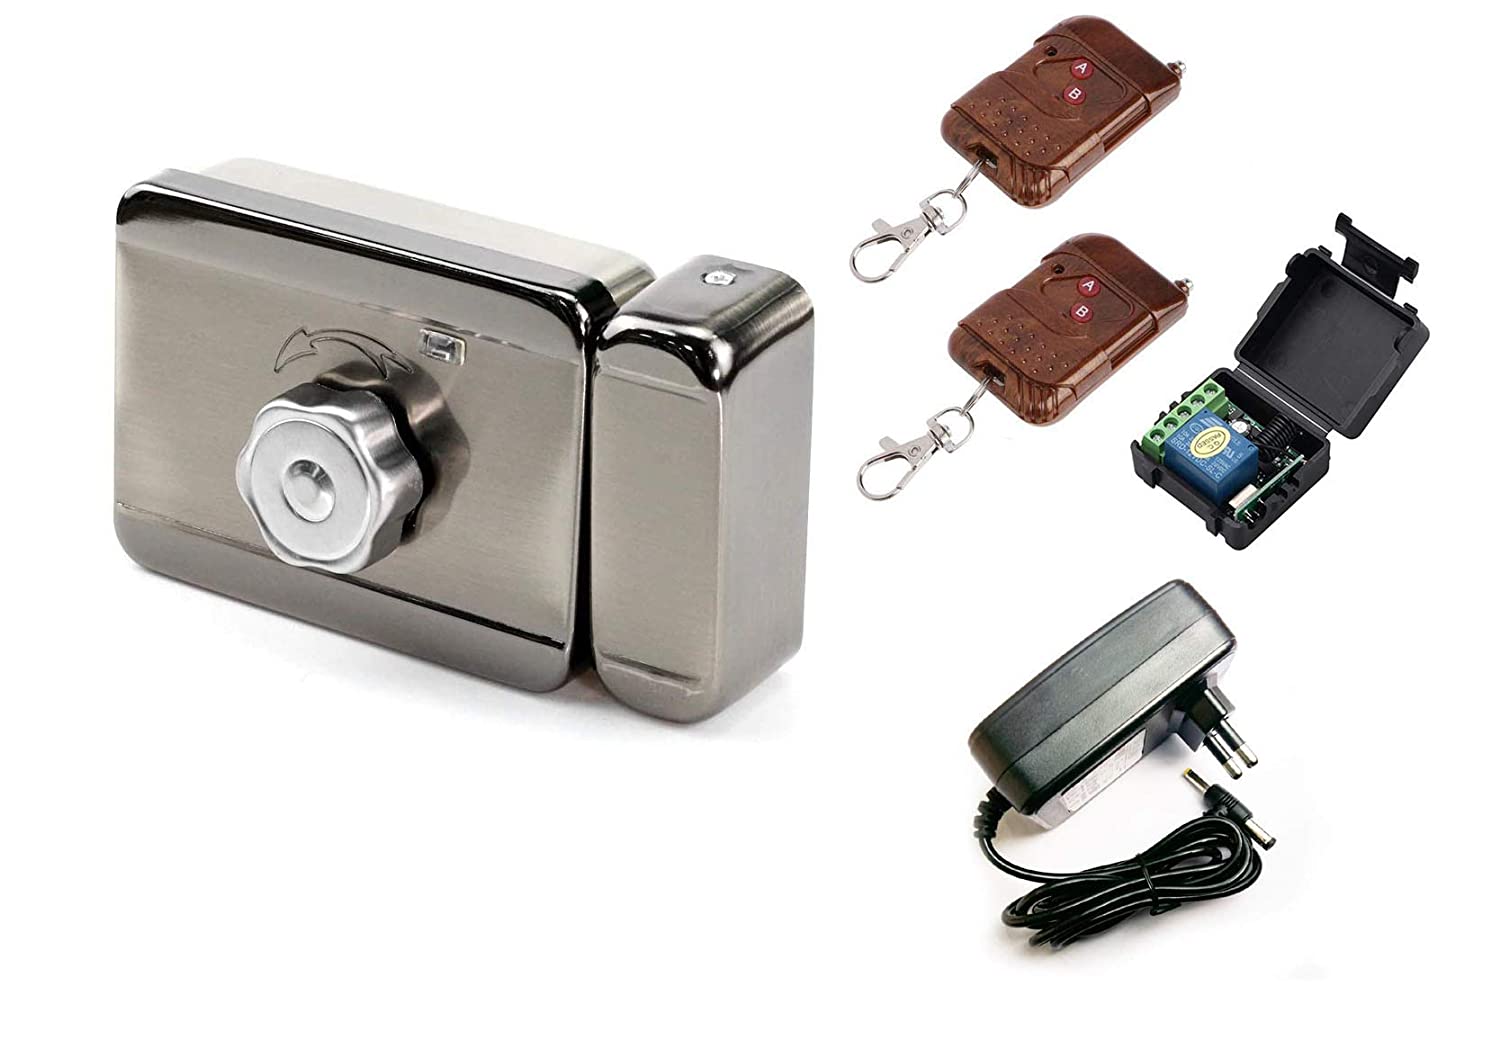 Lock for Wooden Doors with Receiver and One Remote Including Adapter (Multicolor)